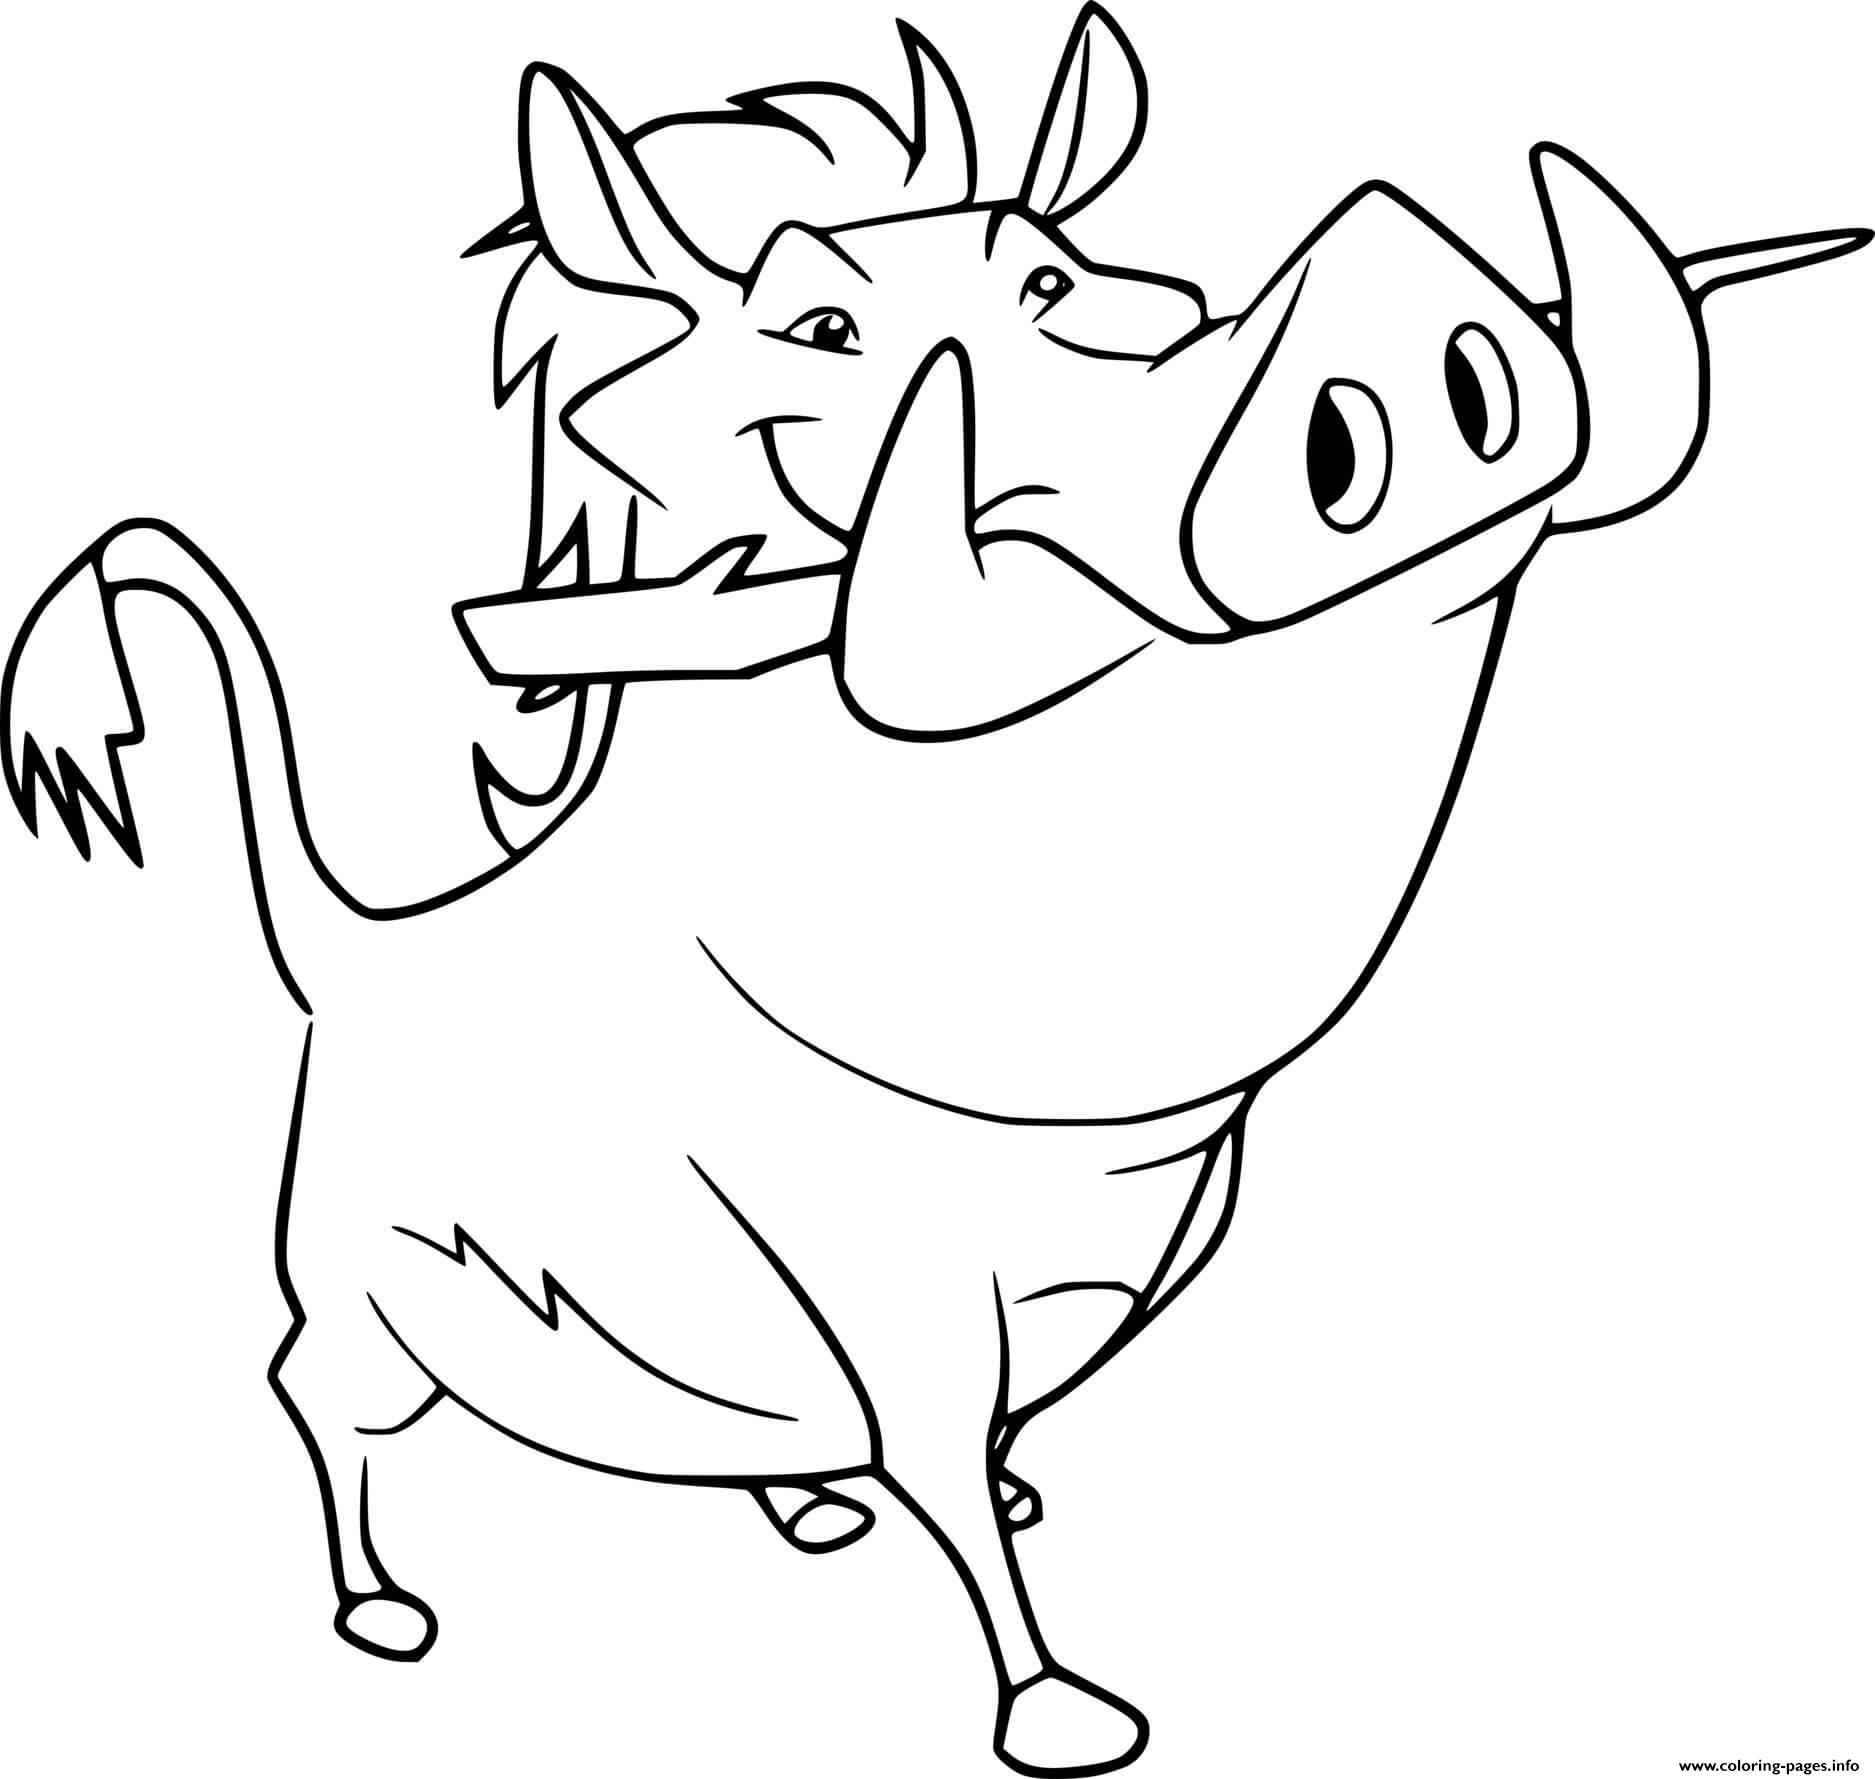 Pumbaa From Lion Guard coloring